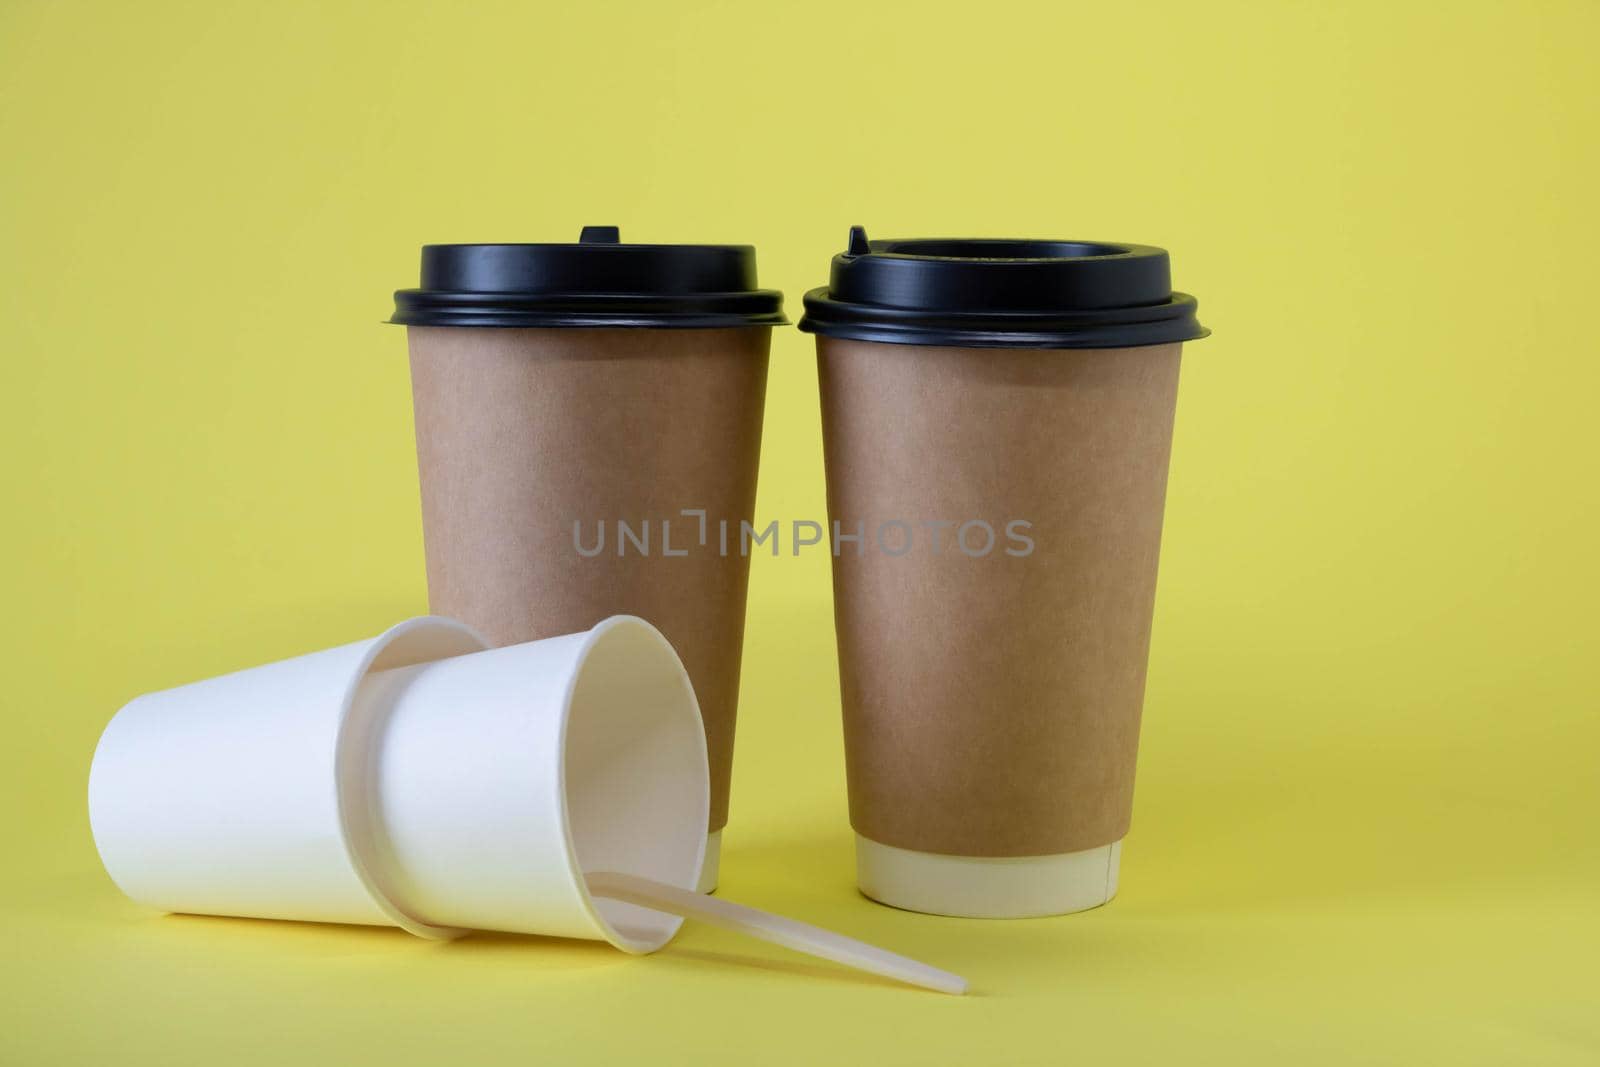 Paper disposable cups for coffee and drinks. Takeaway food by lapushka62